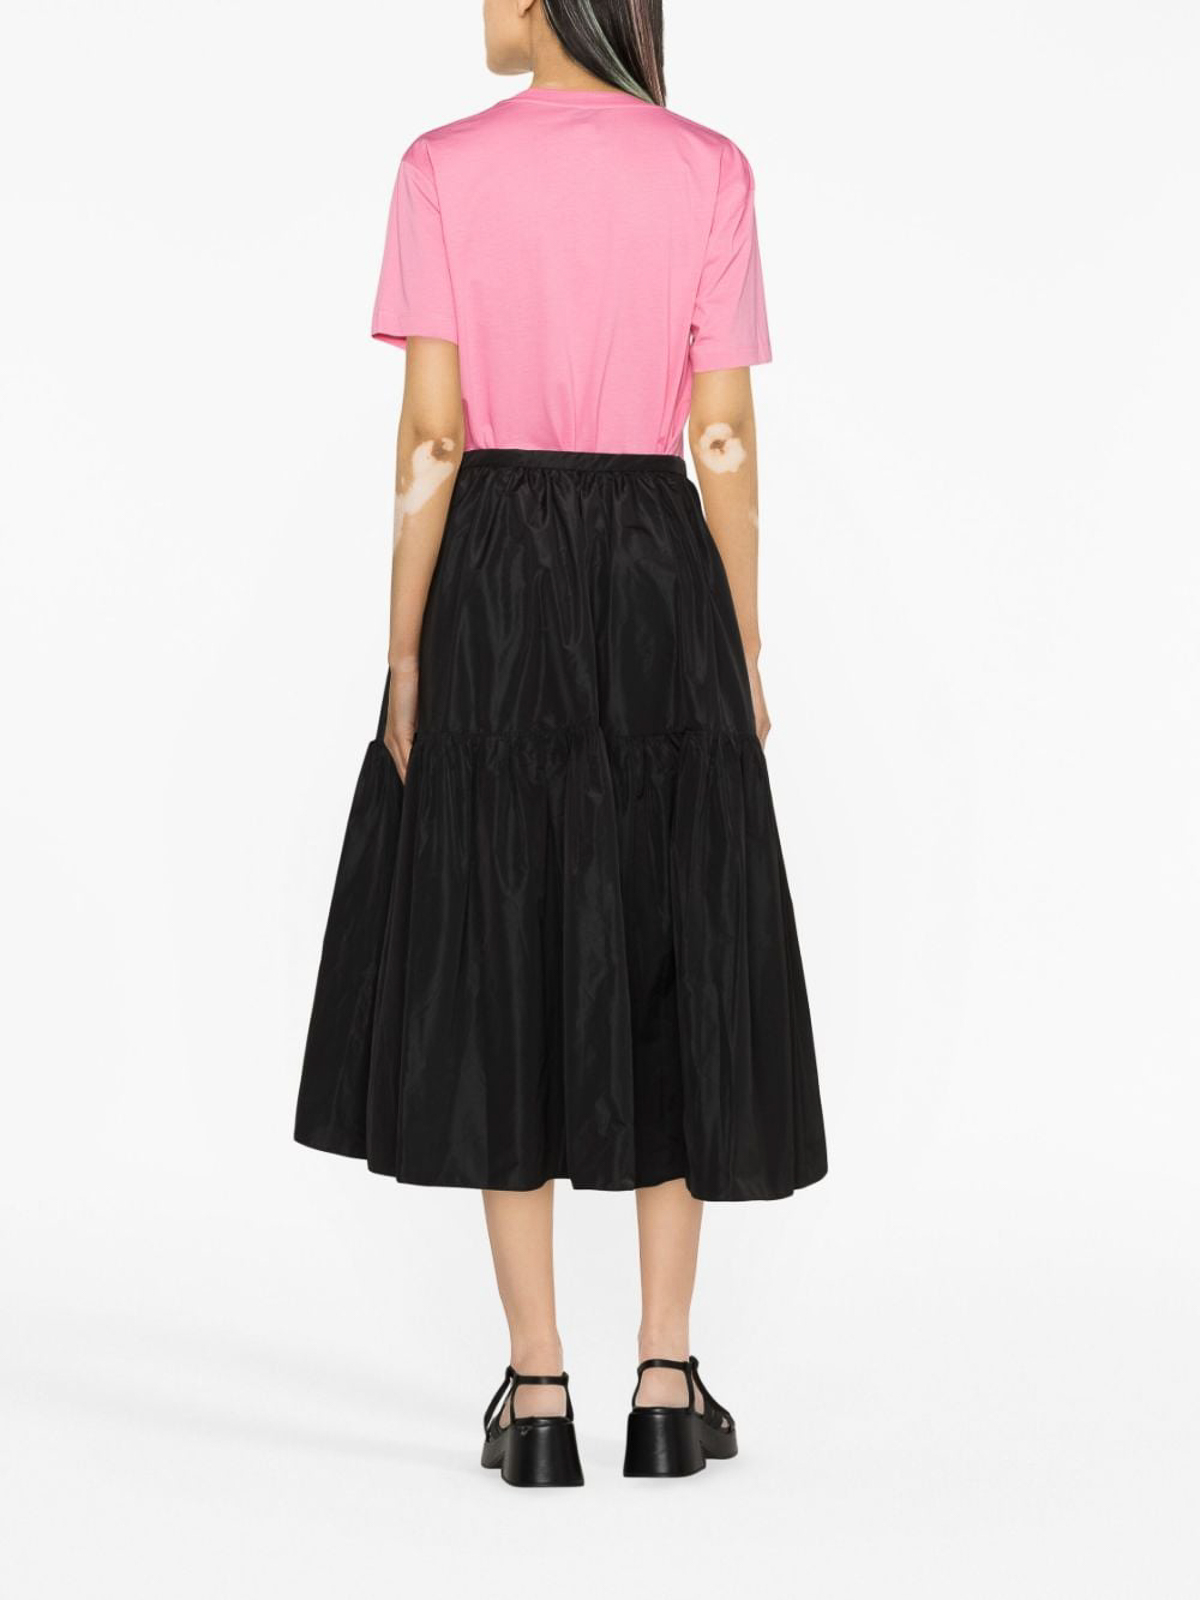 Shop Patou Tiered Midi Skirt In Black